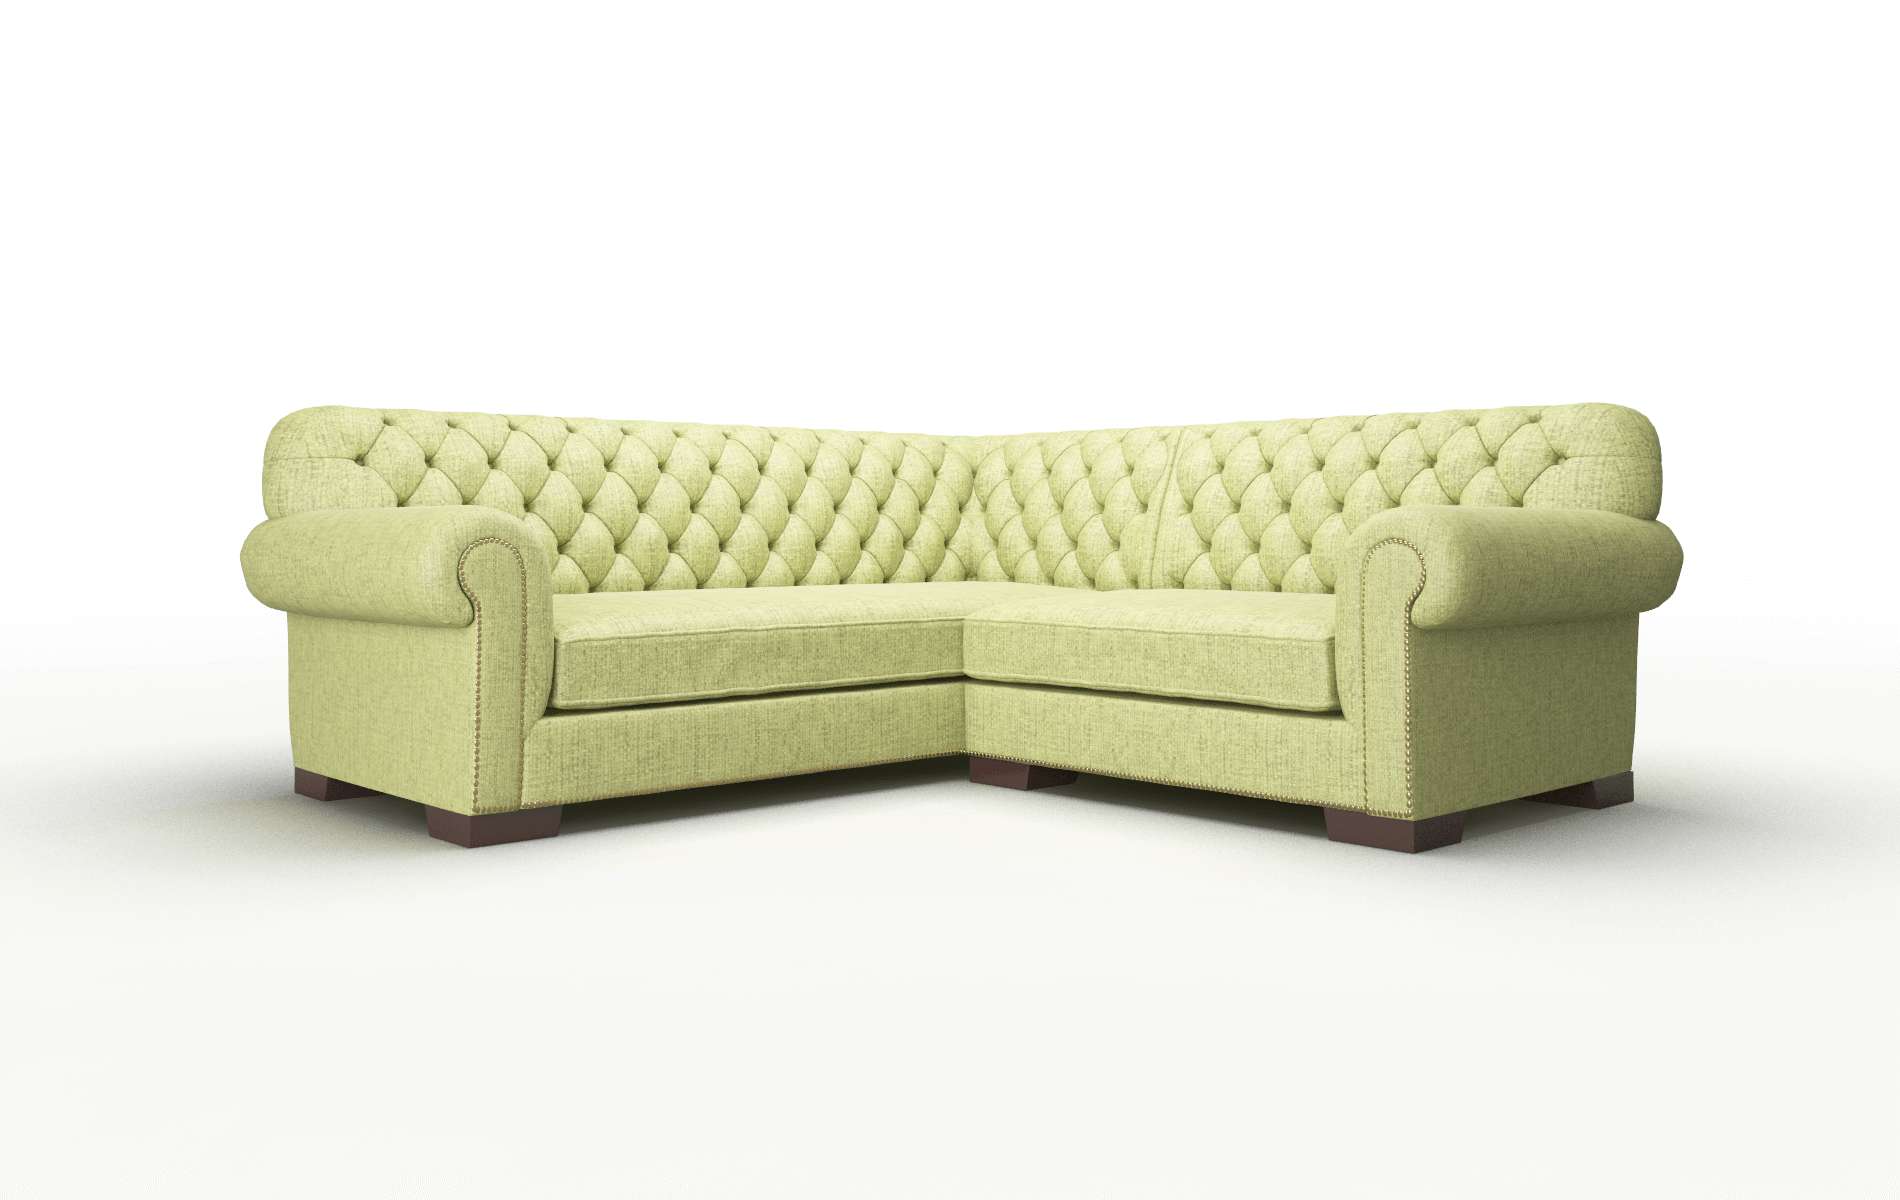 Chester Notion Appletini Sectional espresso legs